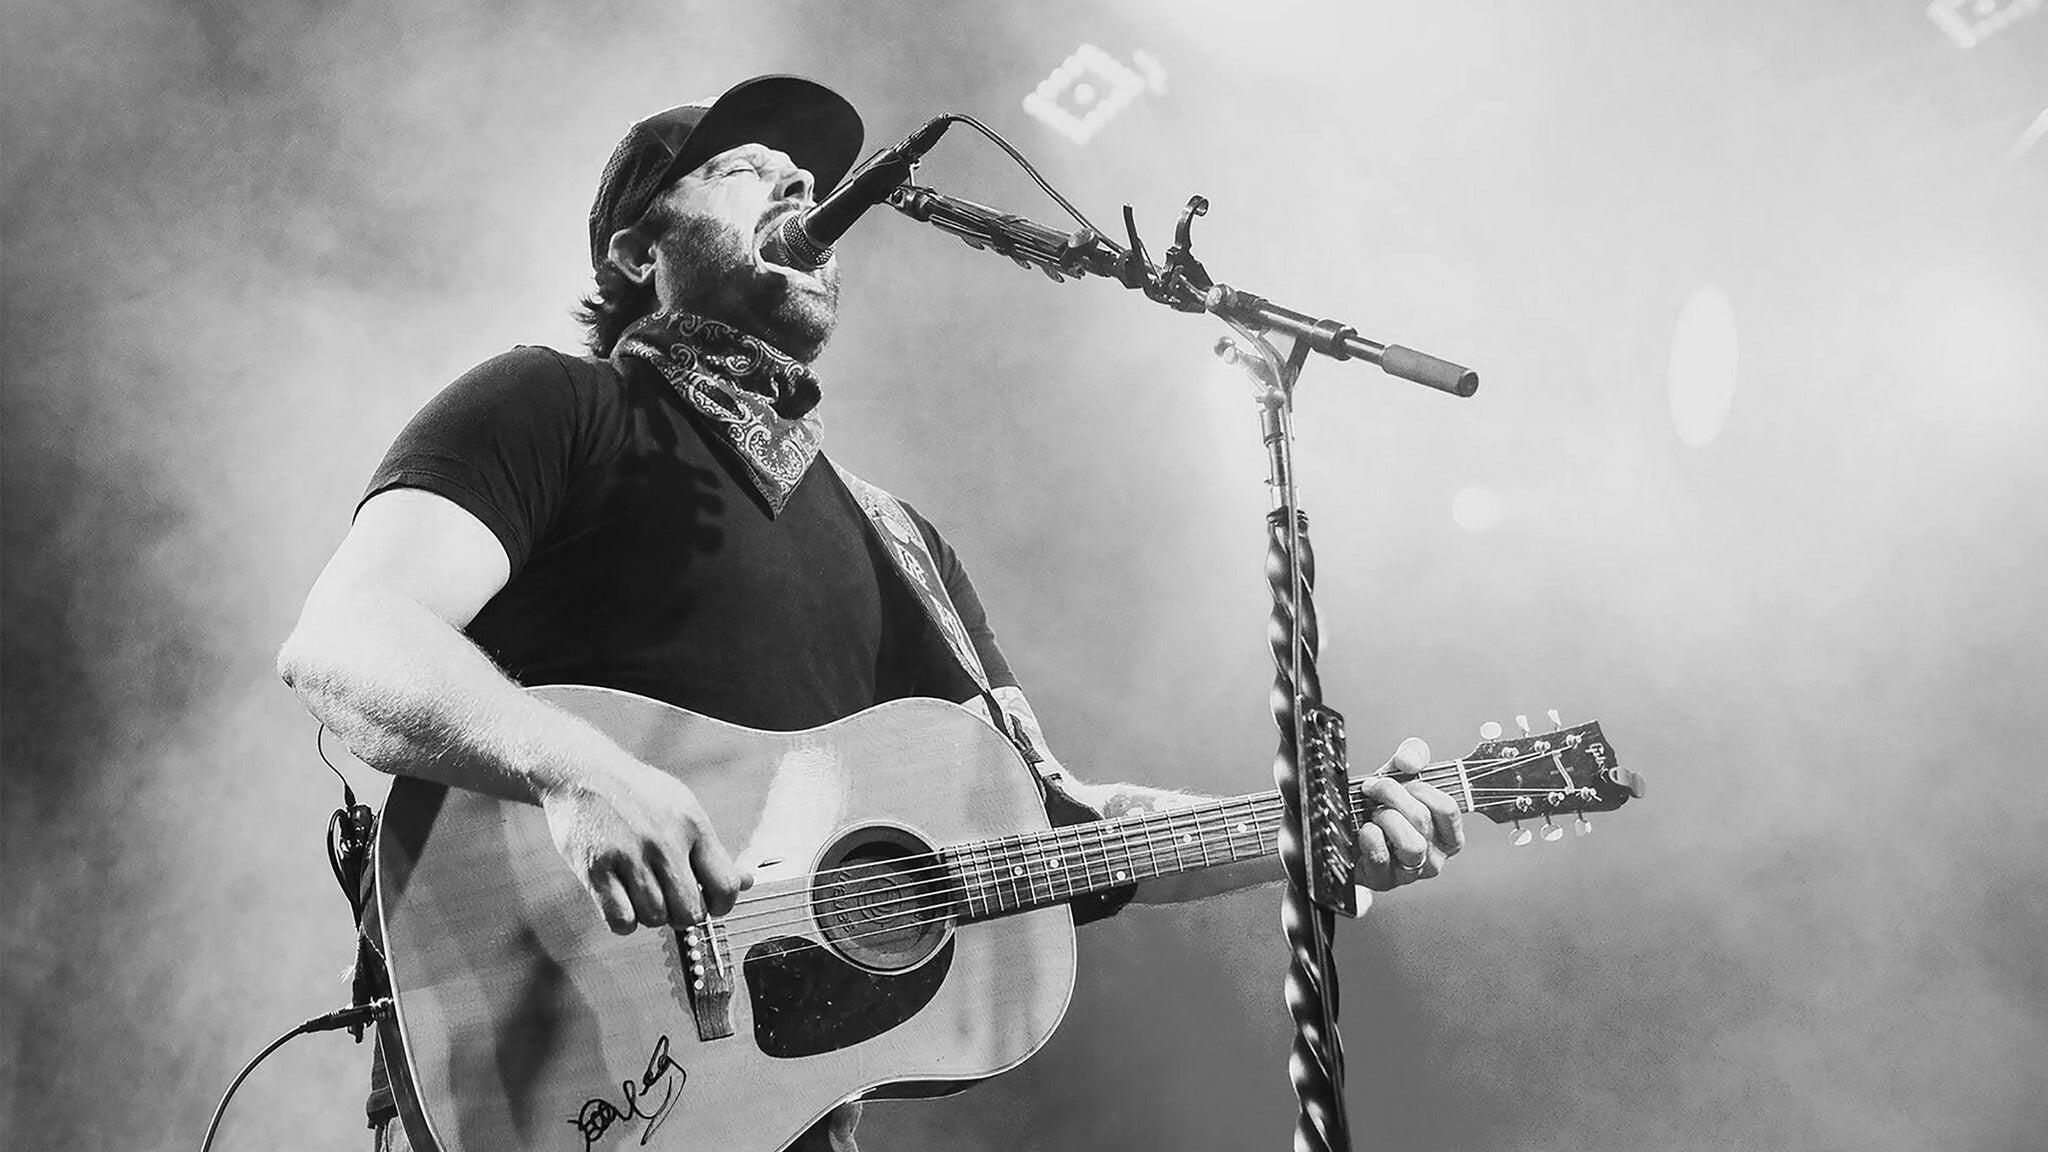 Douglas County Presents Randy Houser with Chase Bryant